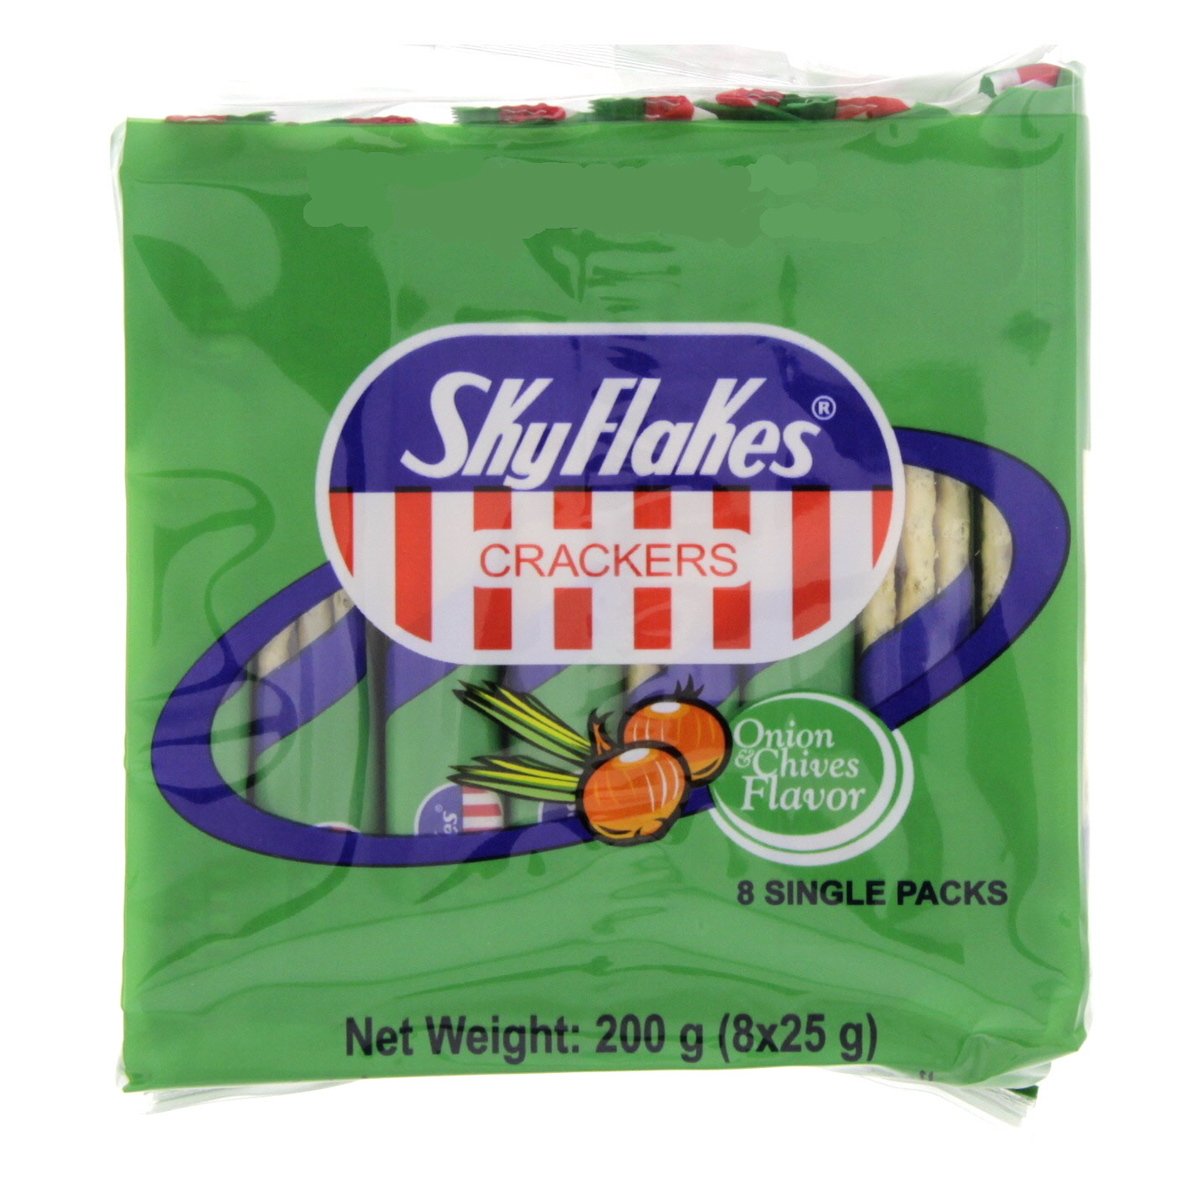 Sky Flakes Onion And Chives Crackers 200 g